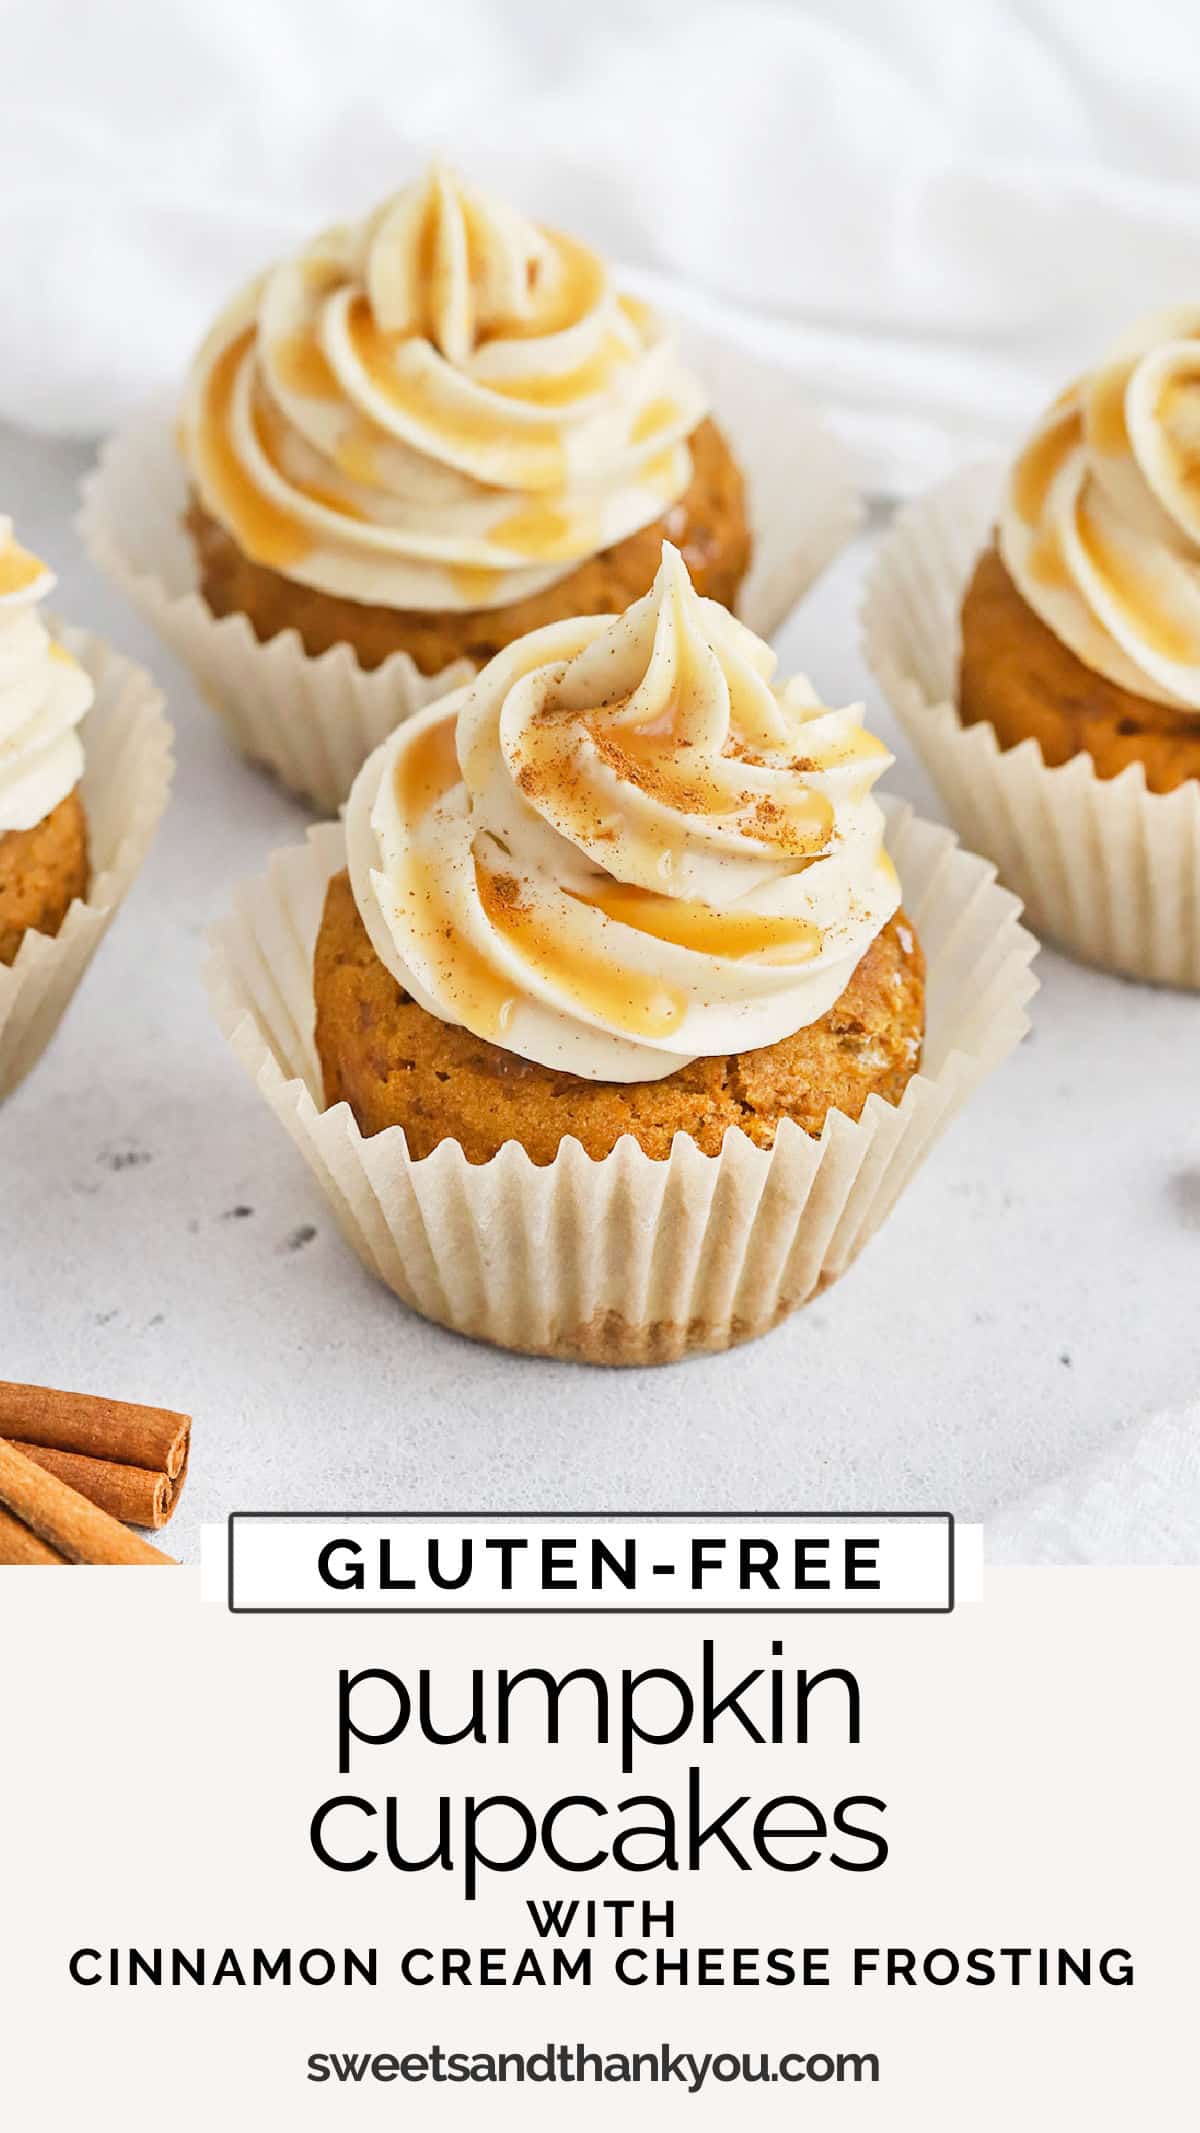 Gluten-Free Pumpkin Cupcakes With Cinnamon Cream Cheese Frosting - My favorite gluten-free pumpkin cupcake recipe with warm spices and a frosting you'll love! // Gluten-Free cupcakes // gluten free pumpkin cake // cinnamon cream cheese frosting recipe // gluten free pumpkin recipes